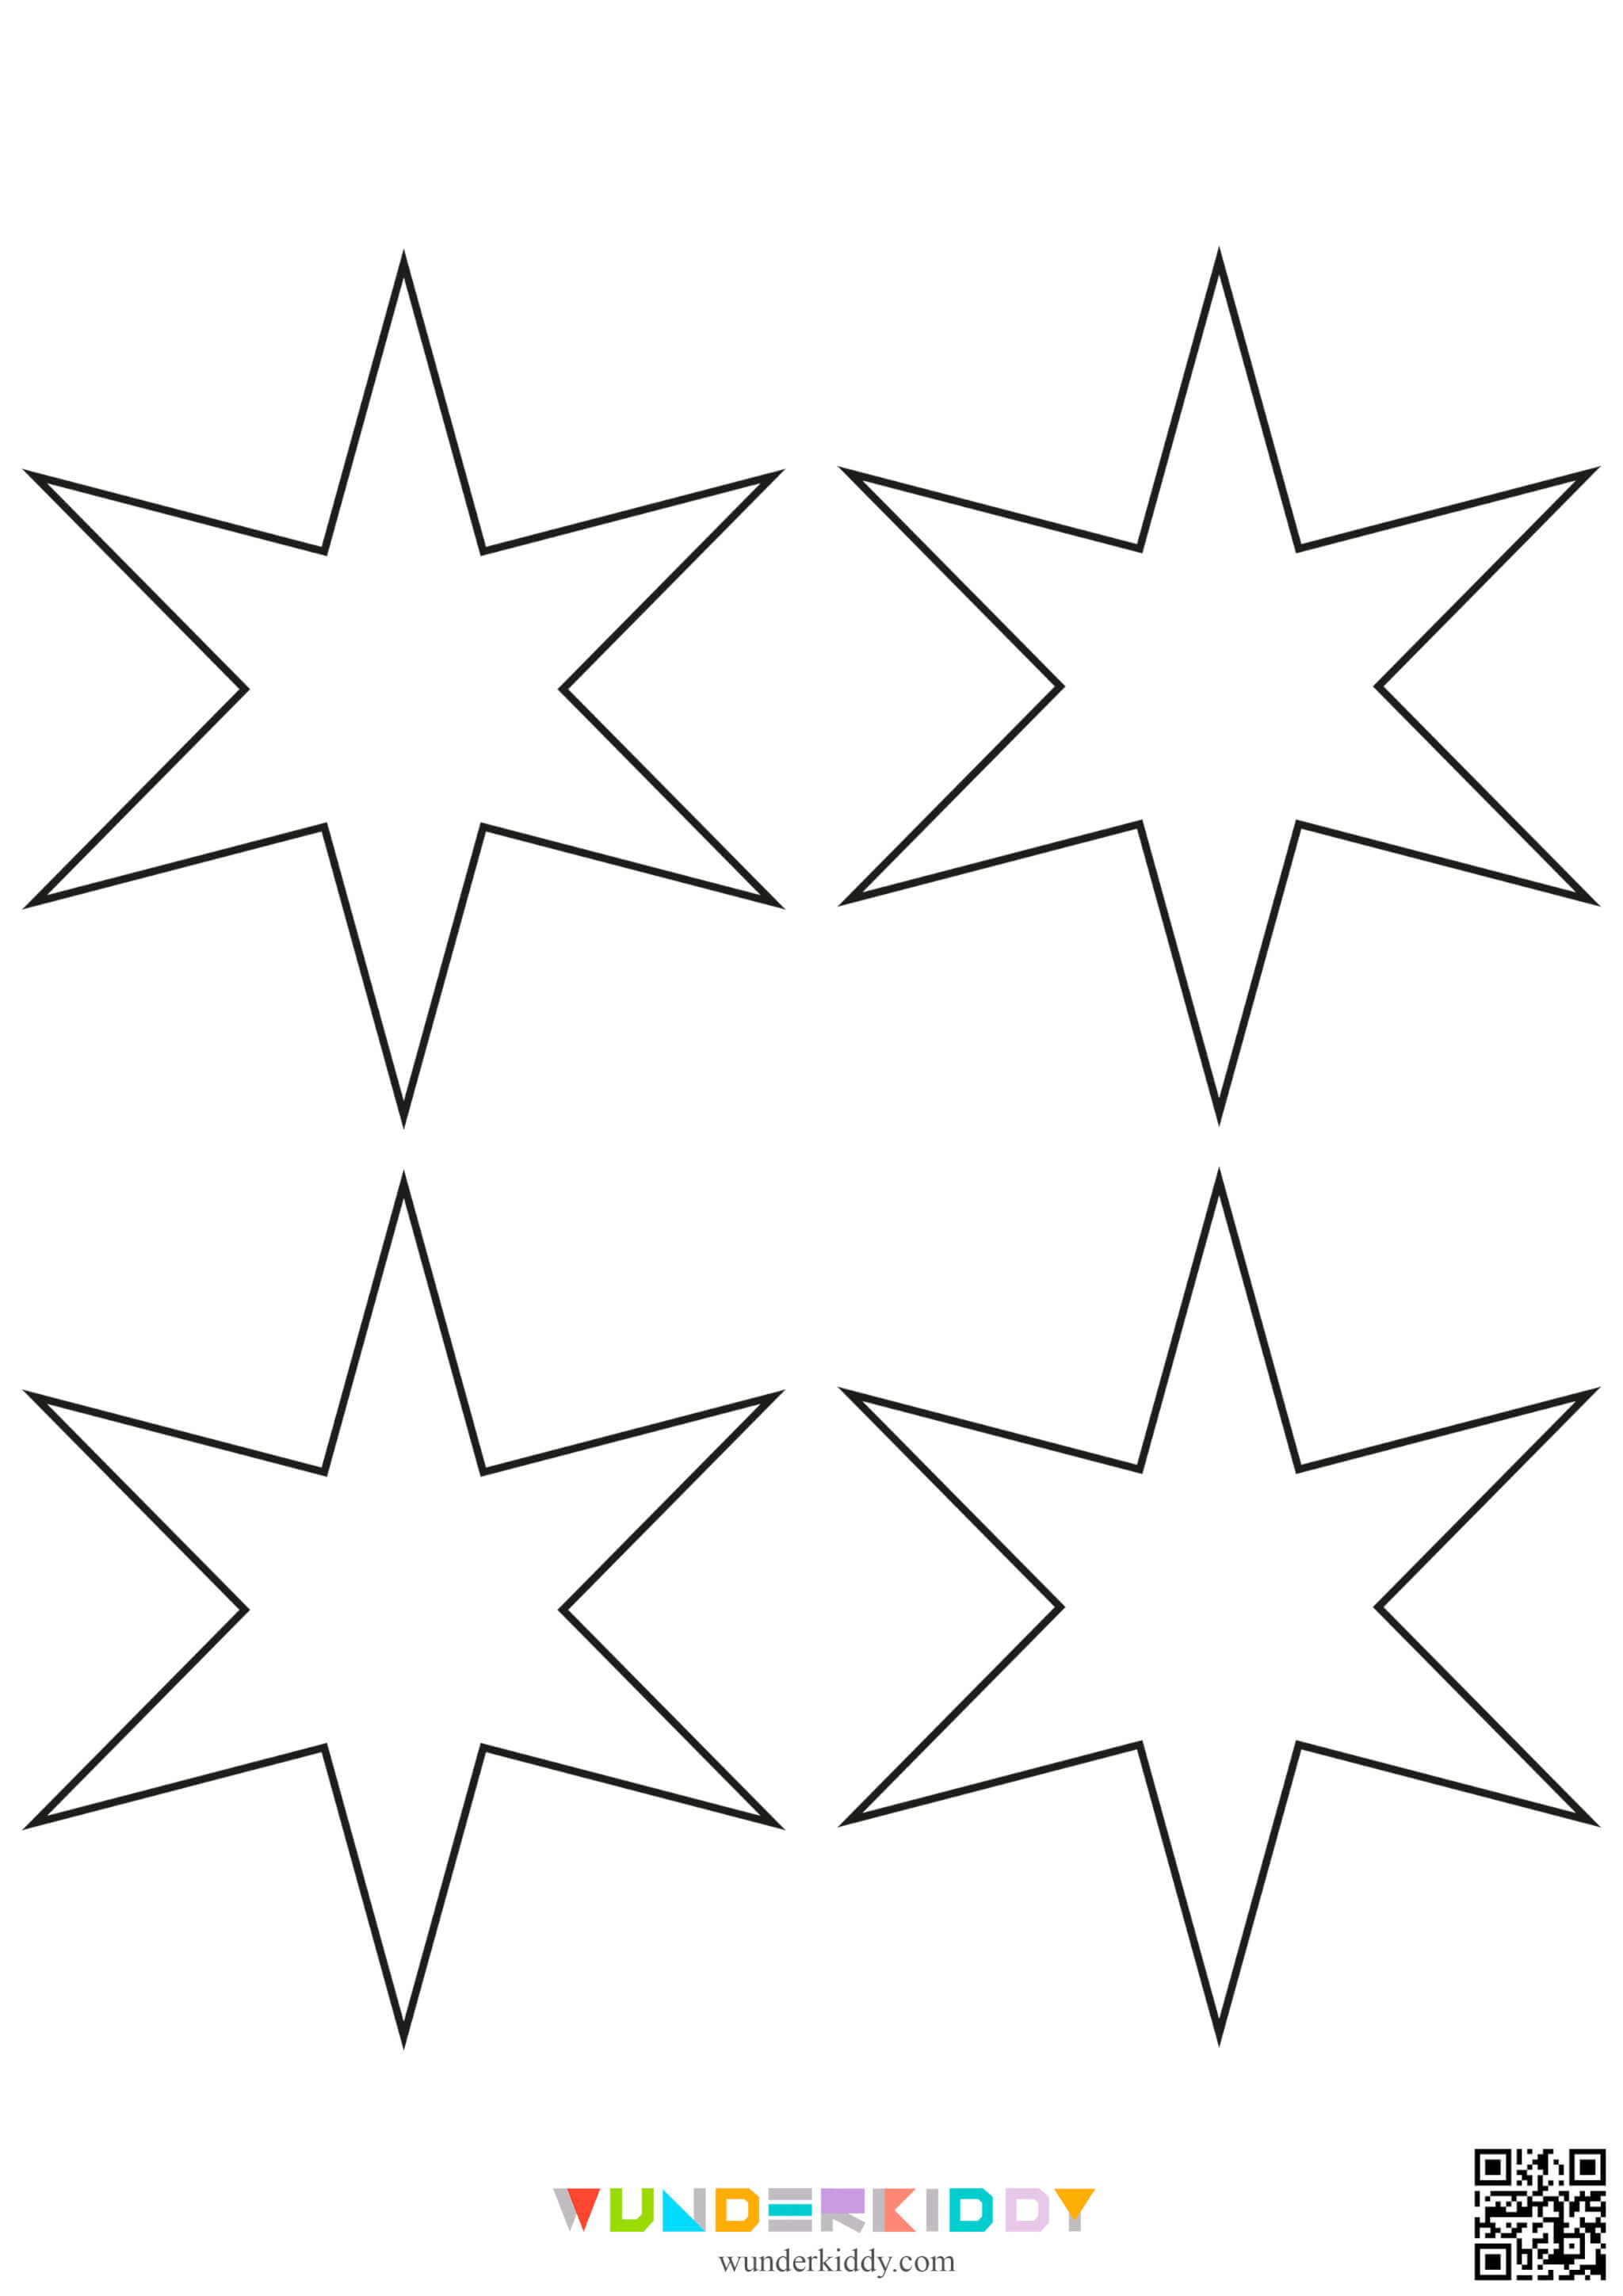 Star Outlines Templates - Image 10